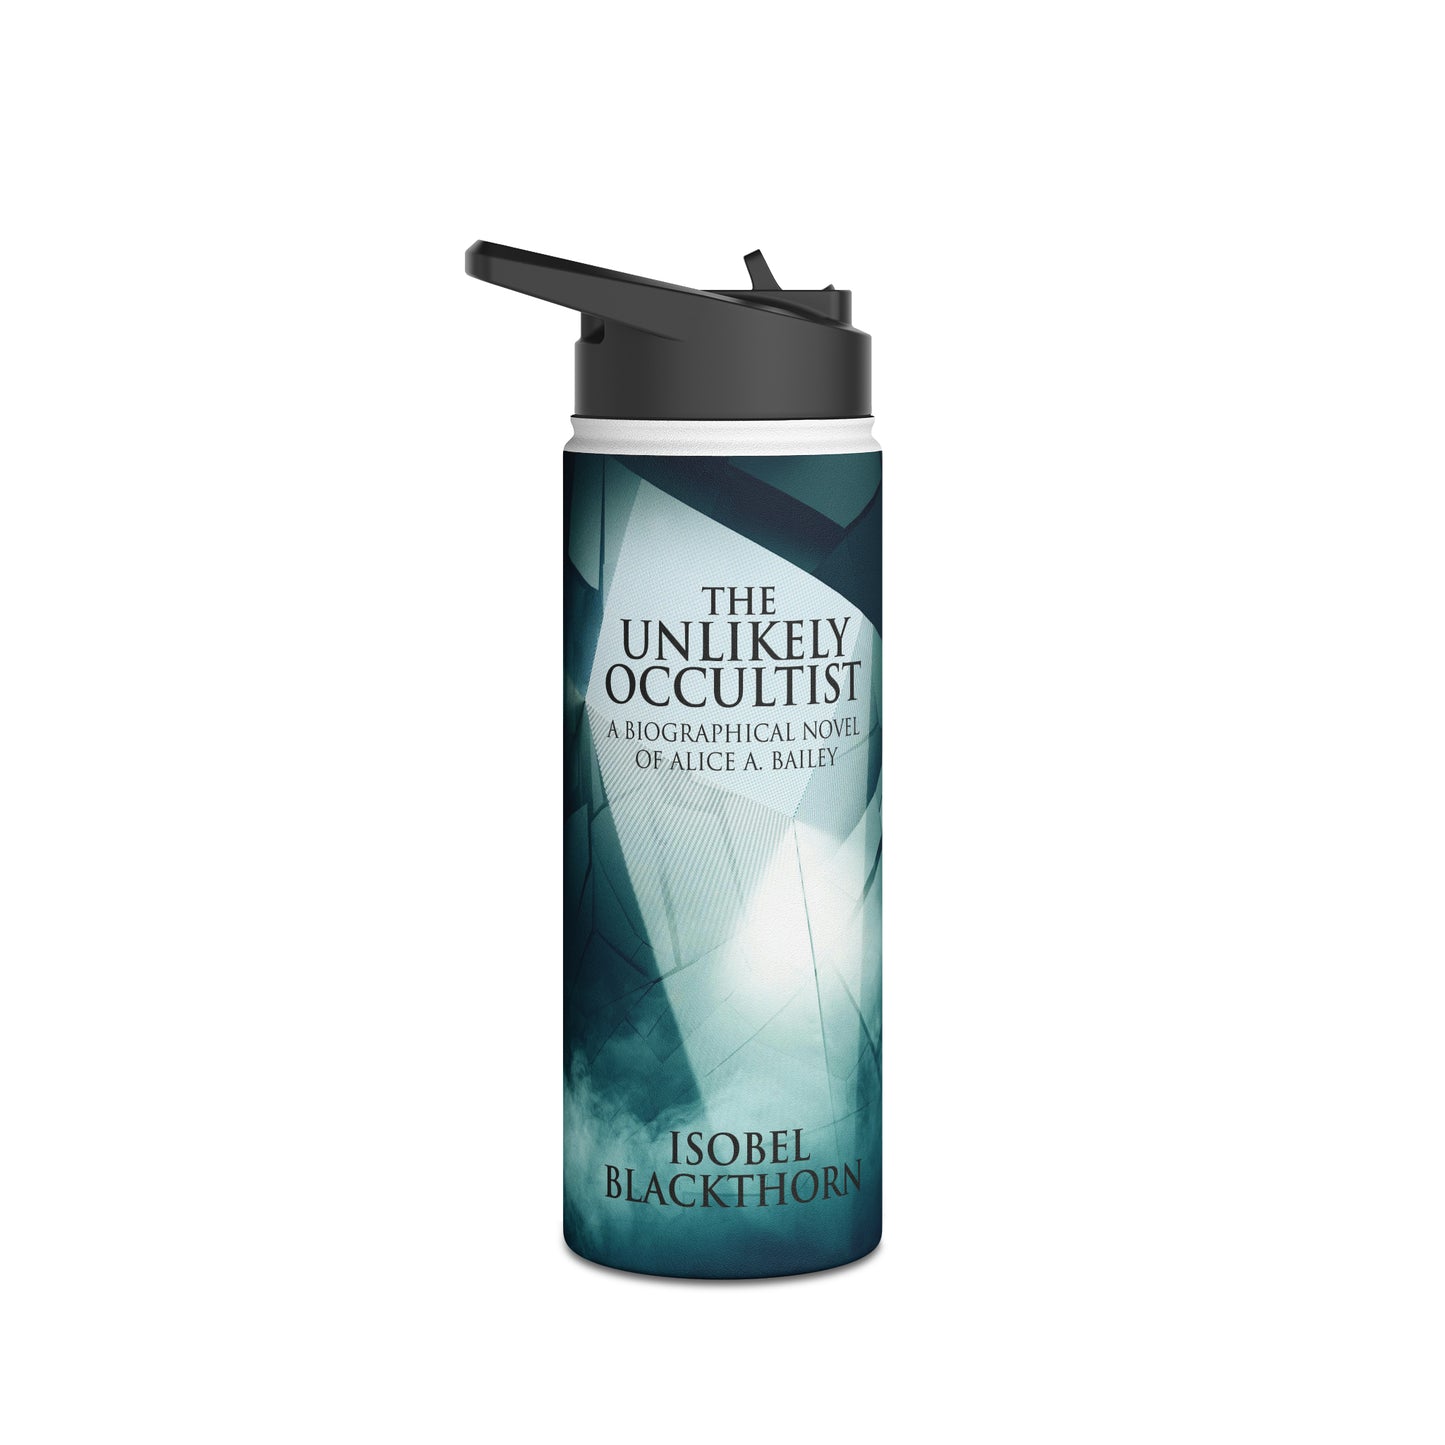 The Unlikely Occultist - Stainless Steel Water Bottle